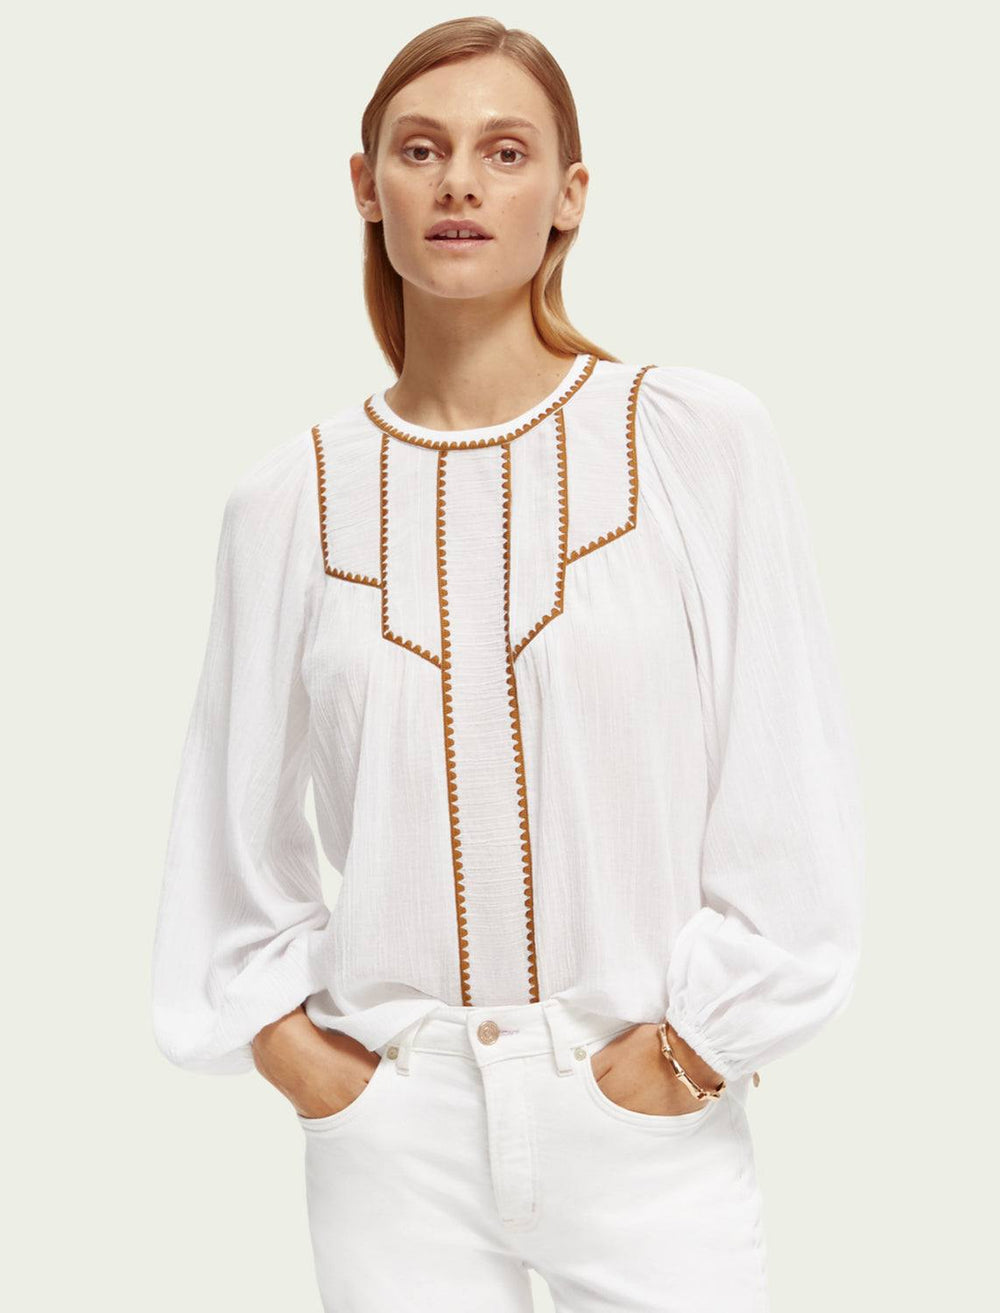 Model wearing Scotch & Soda's white patchwork bib blouse with embroidery.